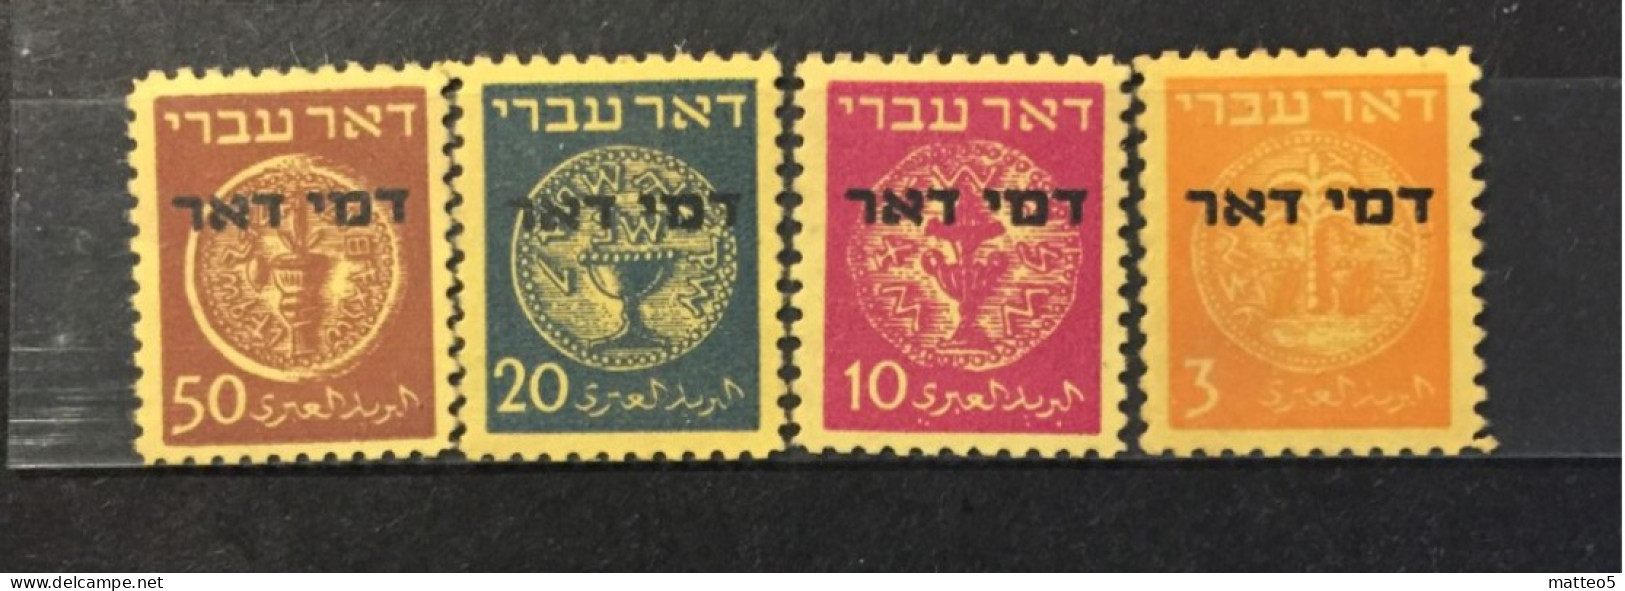 1948 - Israel - Coins Doar Ivri - Postage Due . No Tab - 4 Stamps Unused - Unused Stamps (without Tabs)